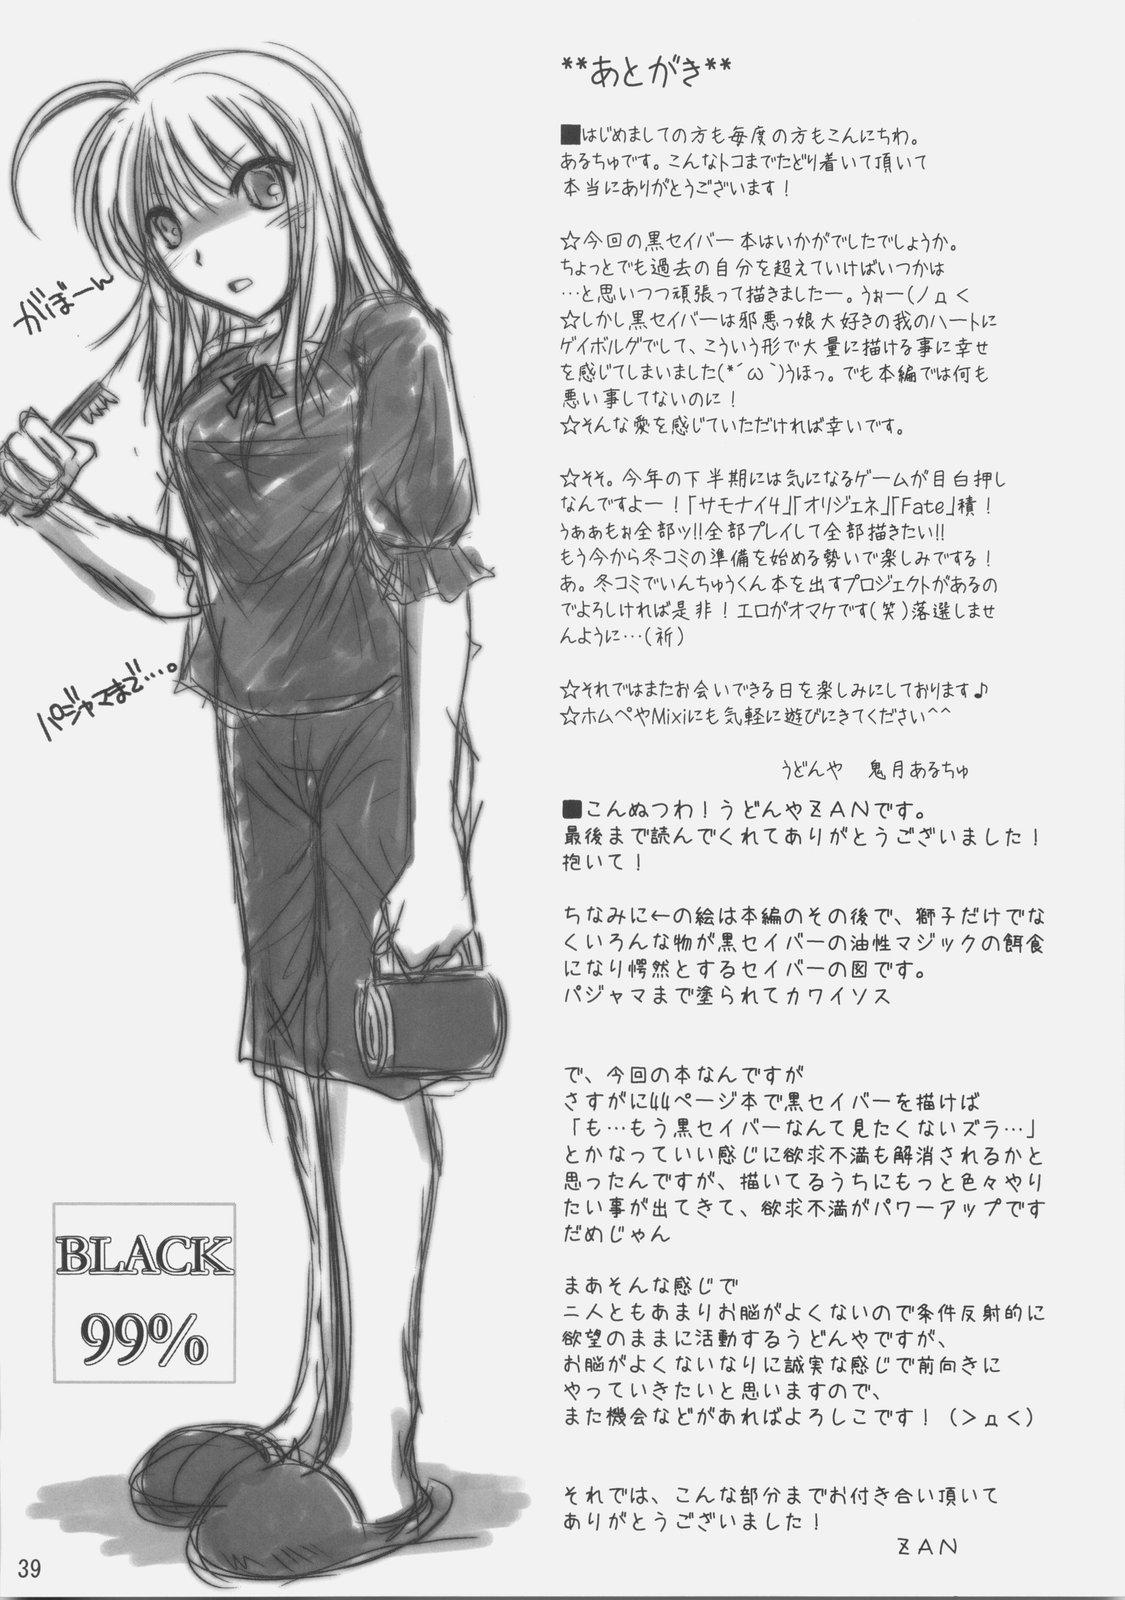 Indian Sex BLACK 99% - Fate hollow ataraxia Blow Jobs - Page 38